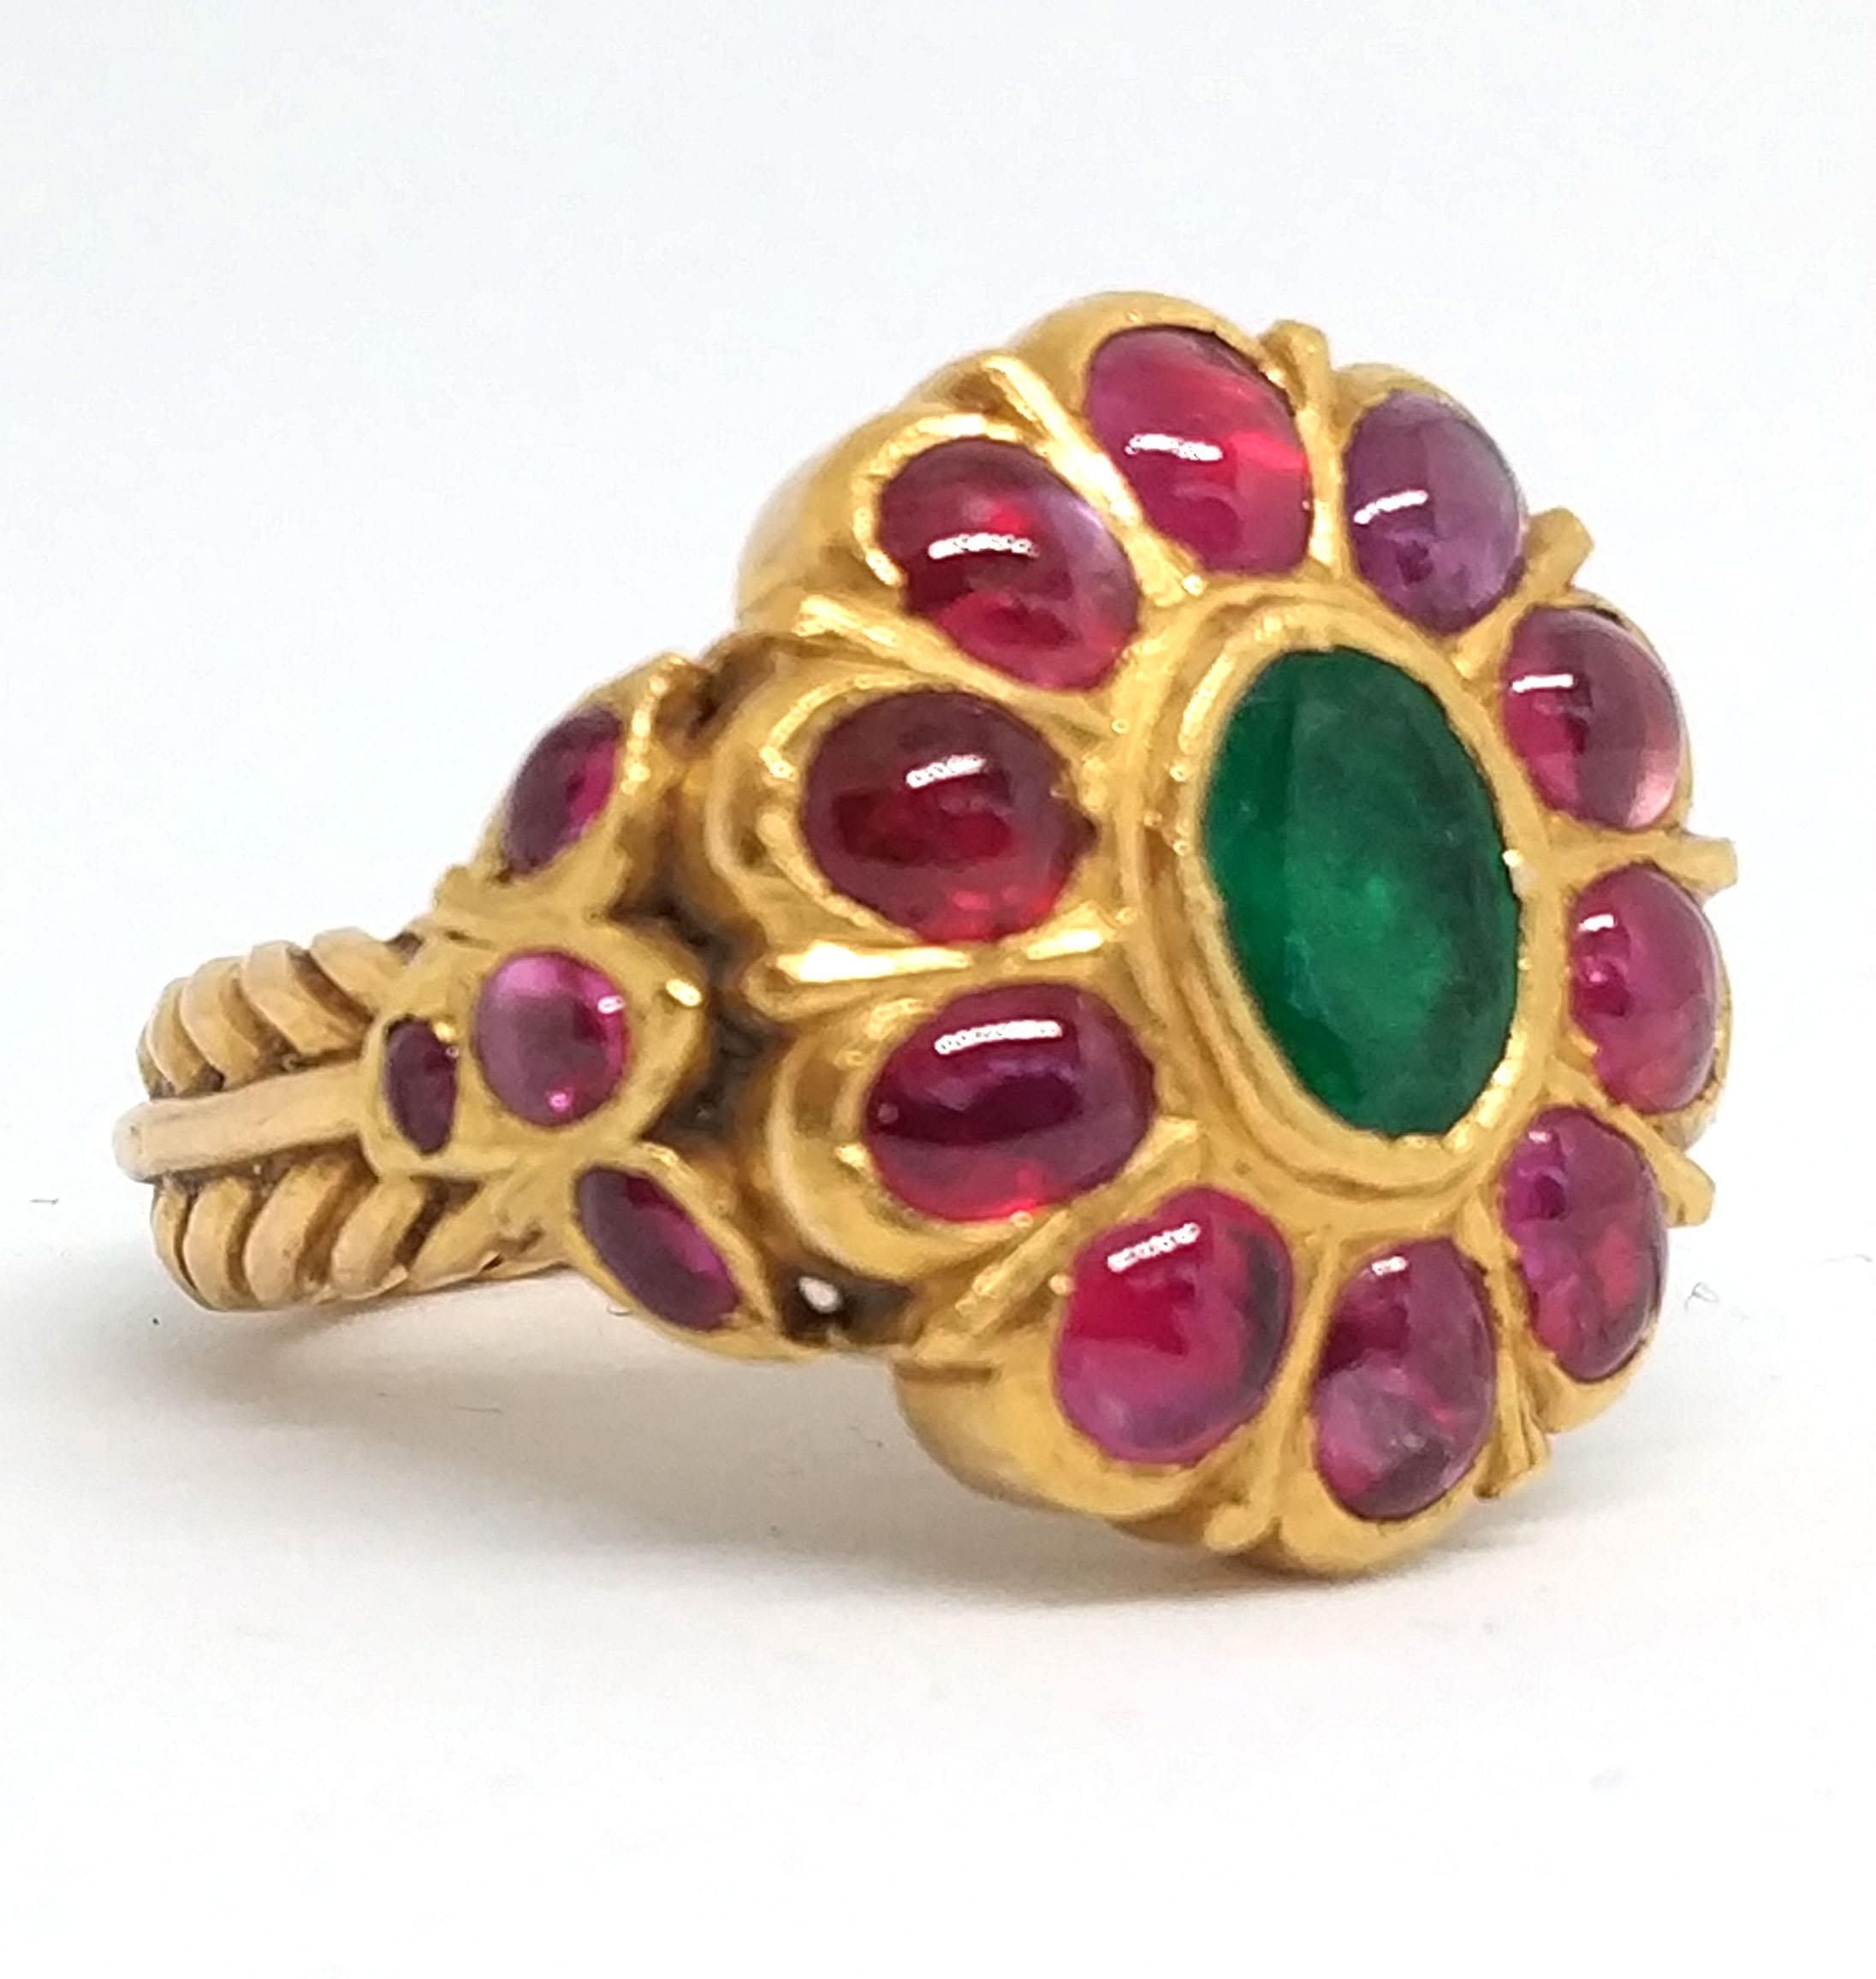 Antique Royal 5.5 carat Ruby and 3 carat Emerald Ring in 23 Carat Gold For Sale 3